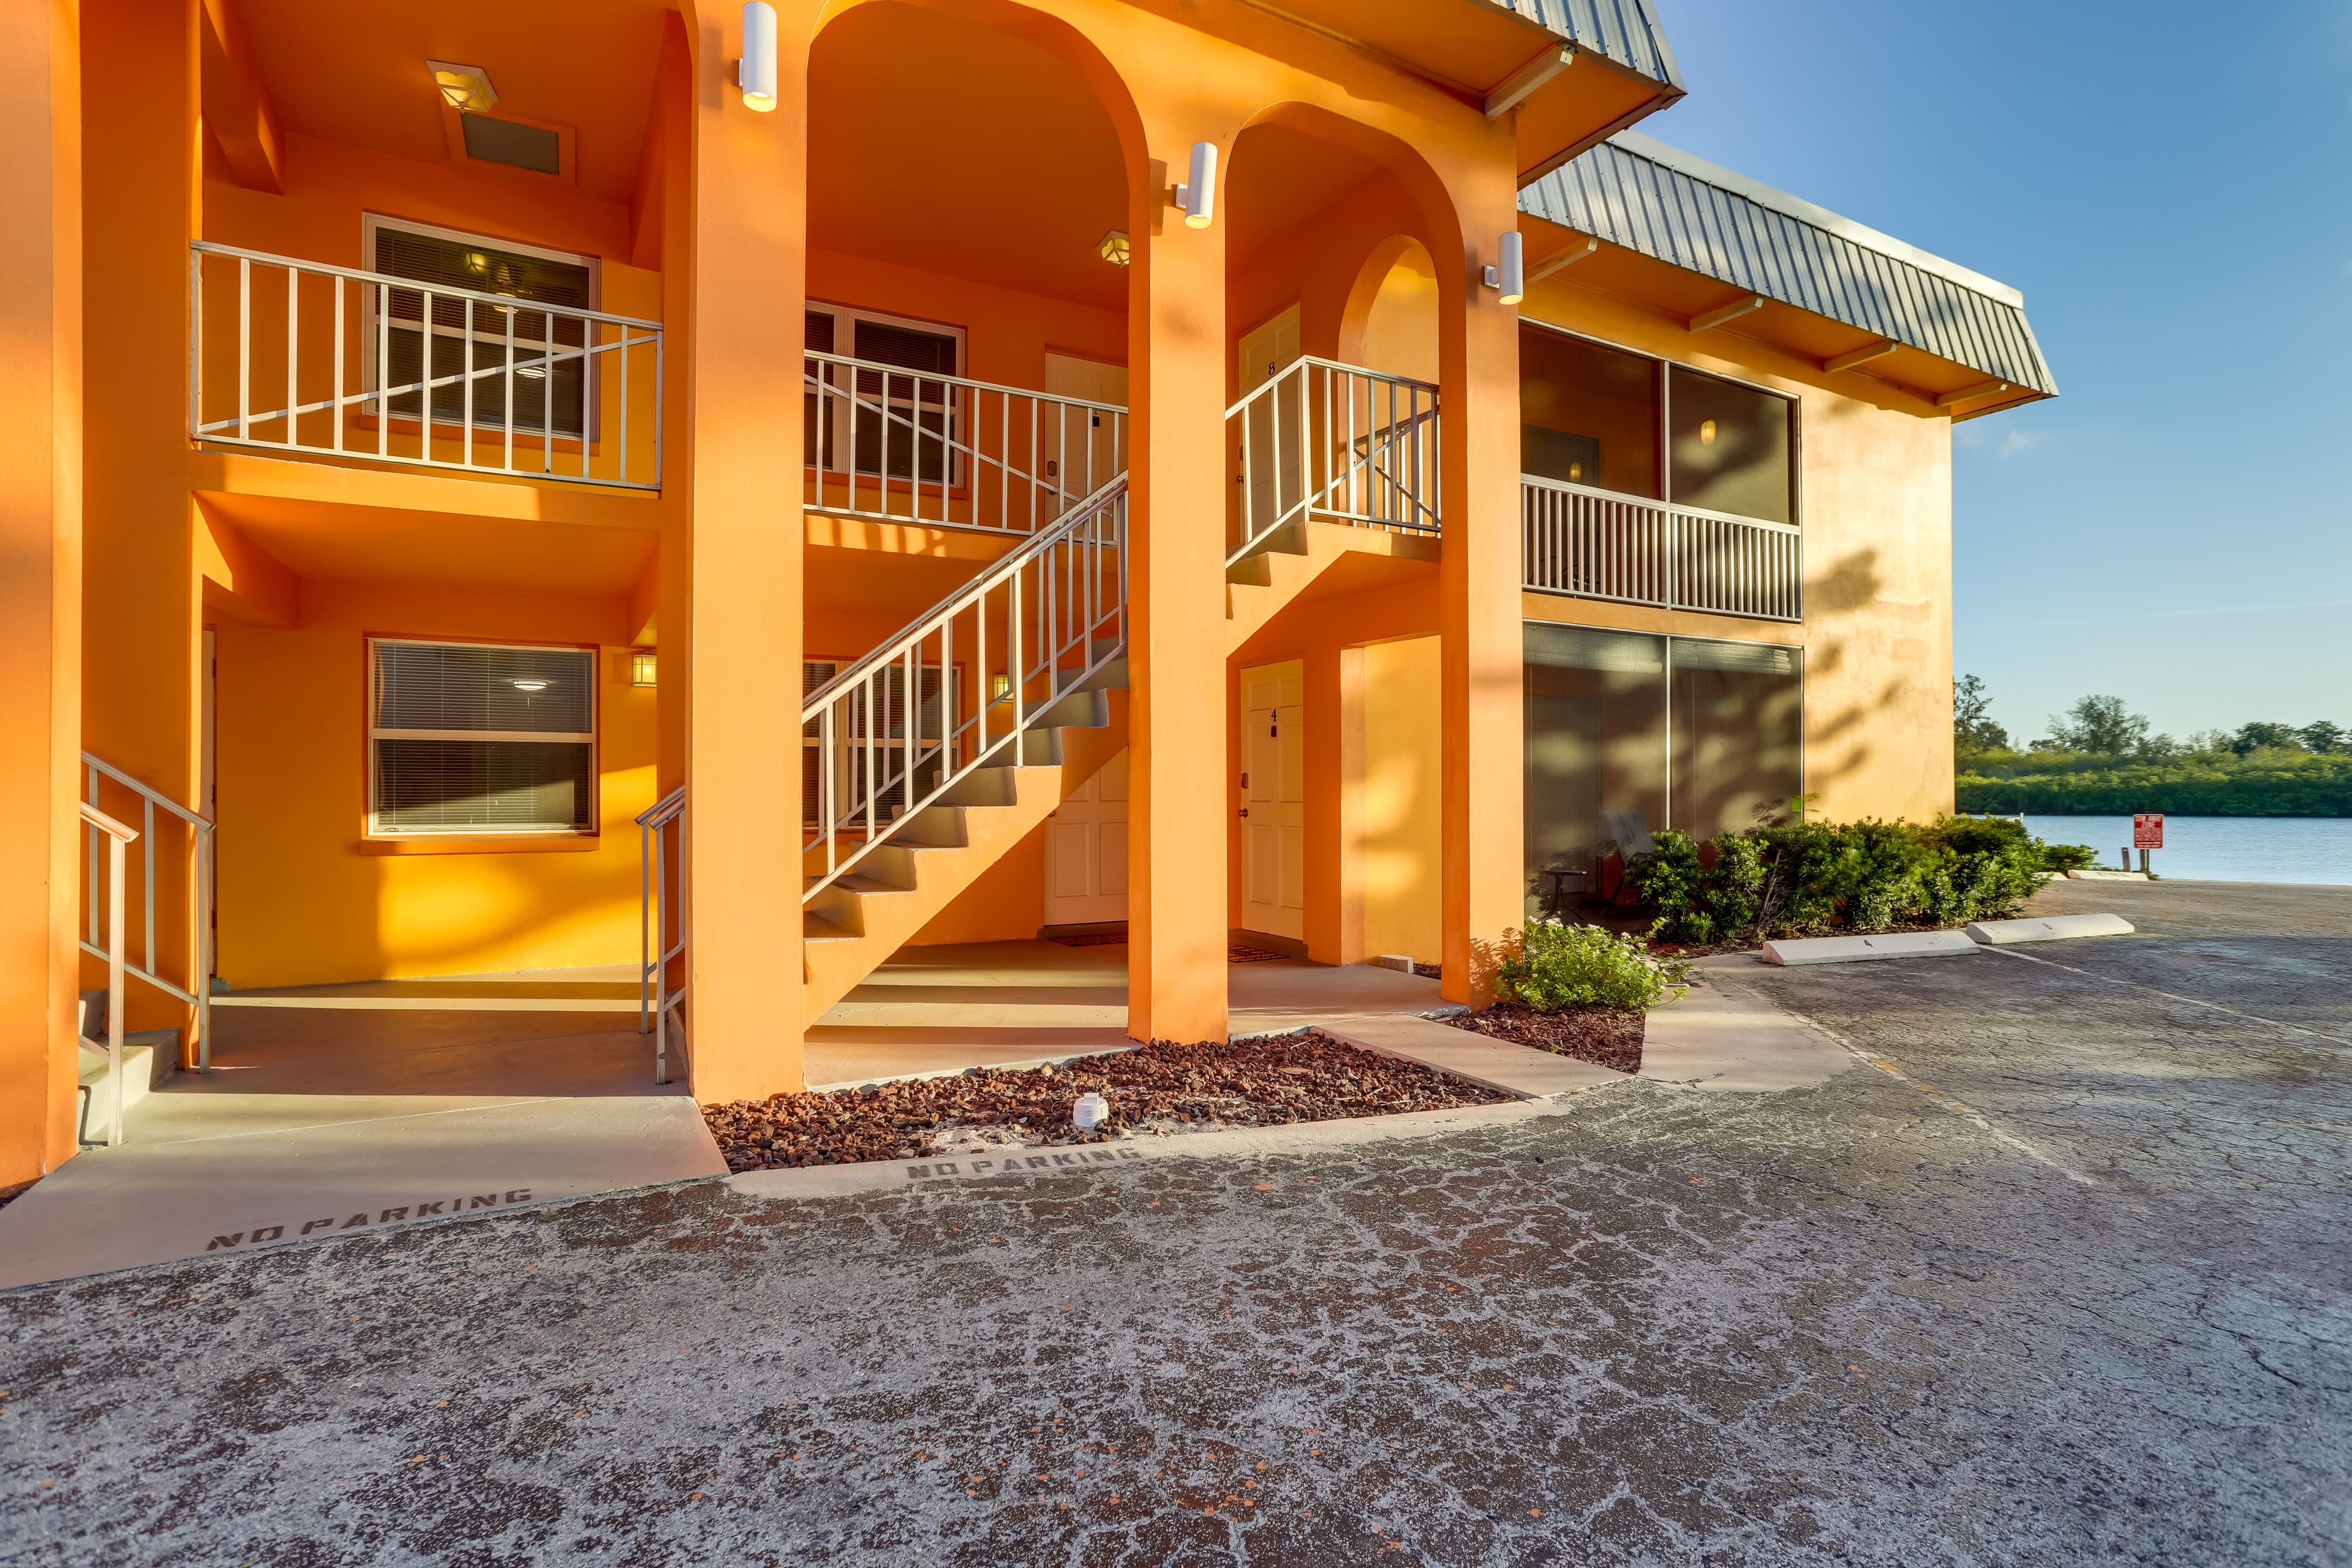 Condo Exterior | Other Vacation Rentals On-Site